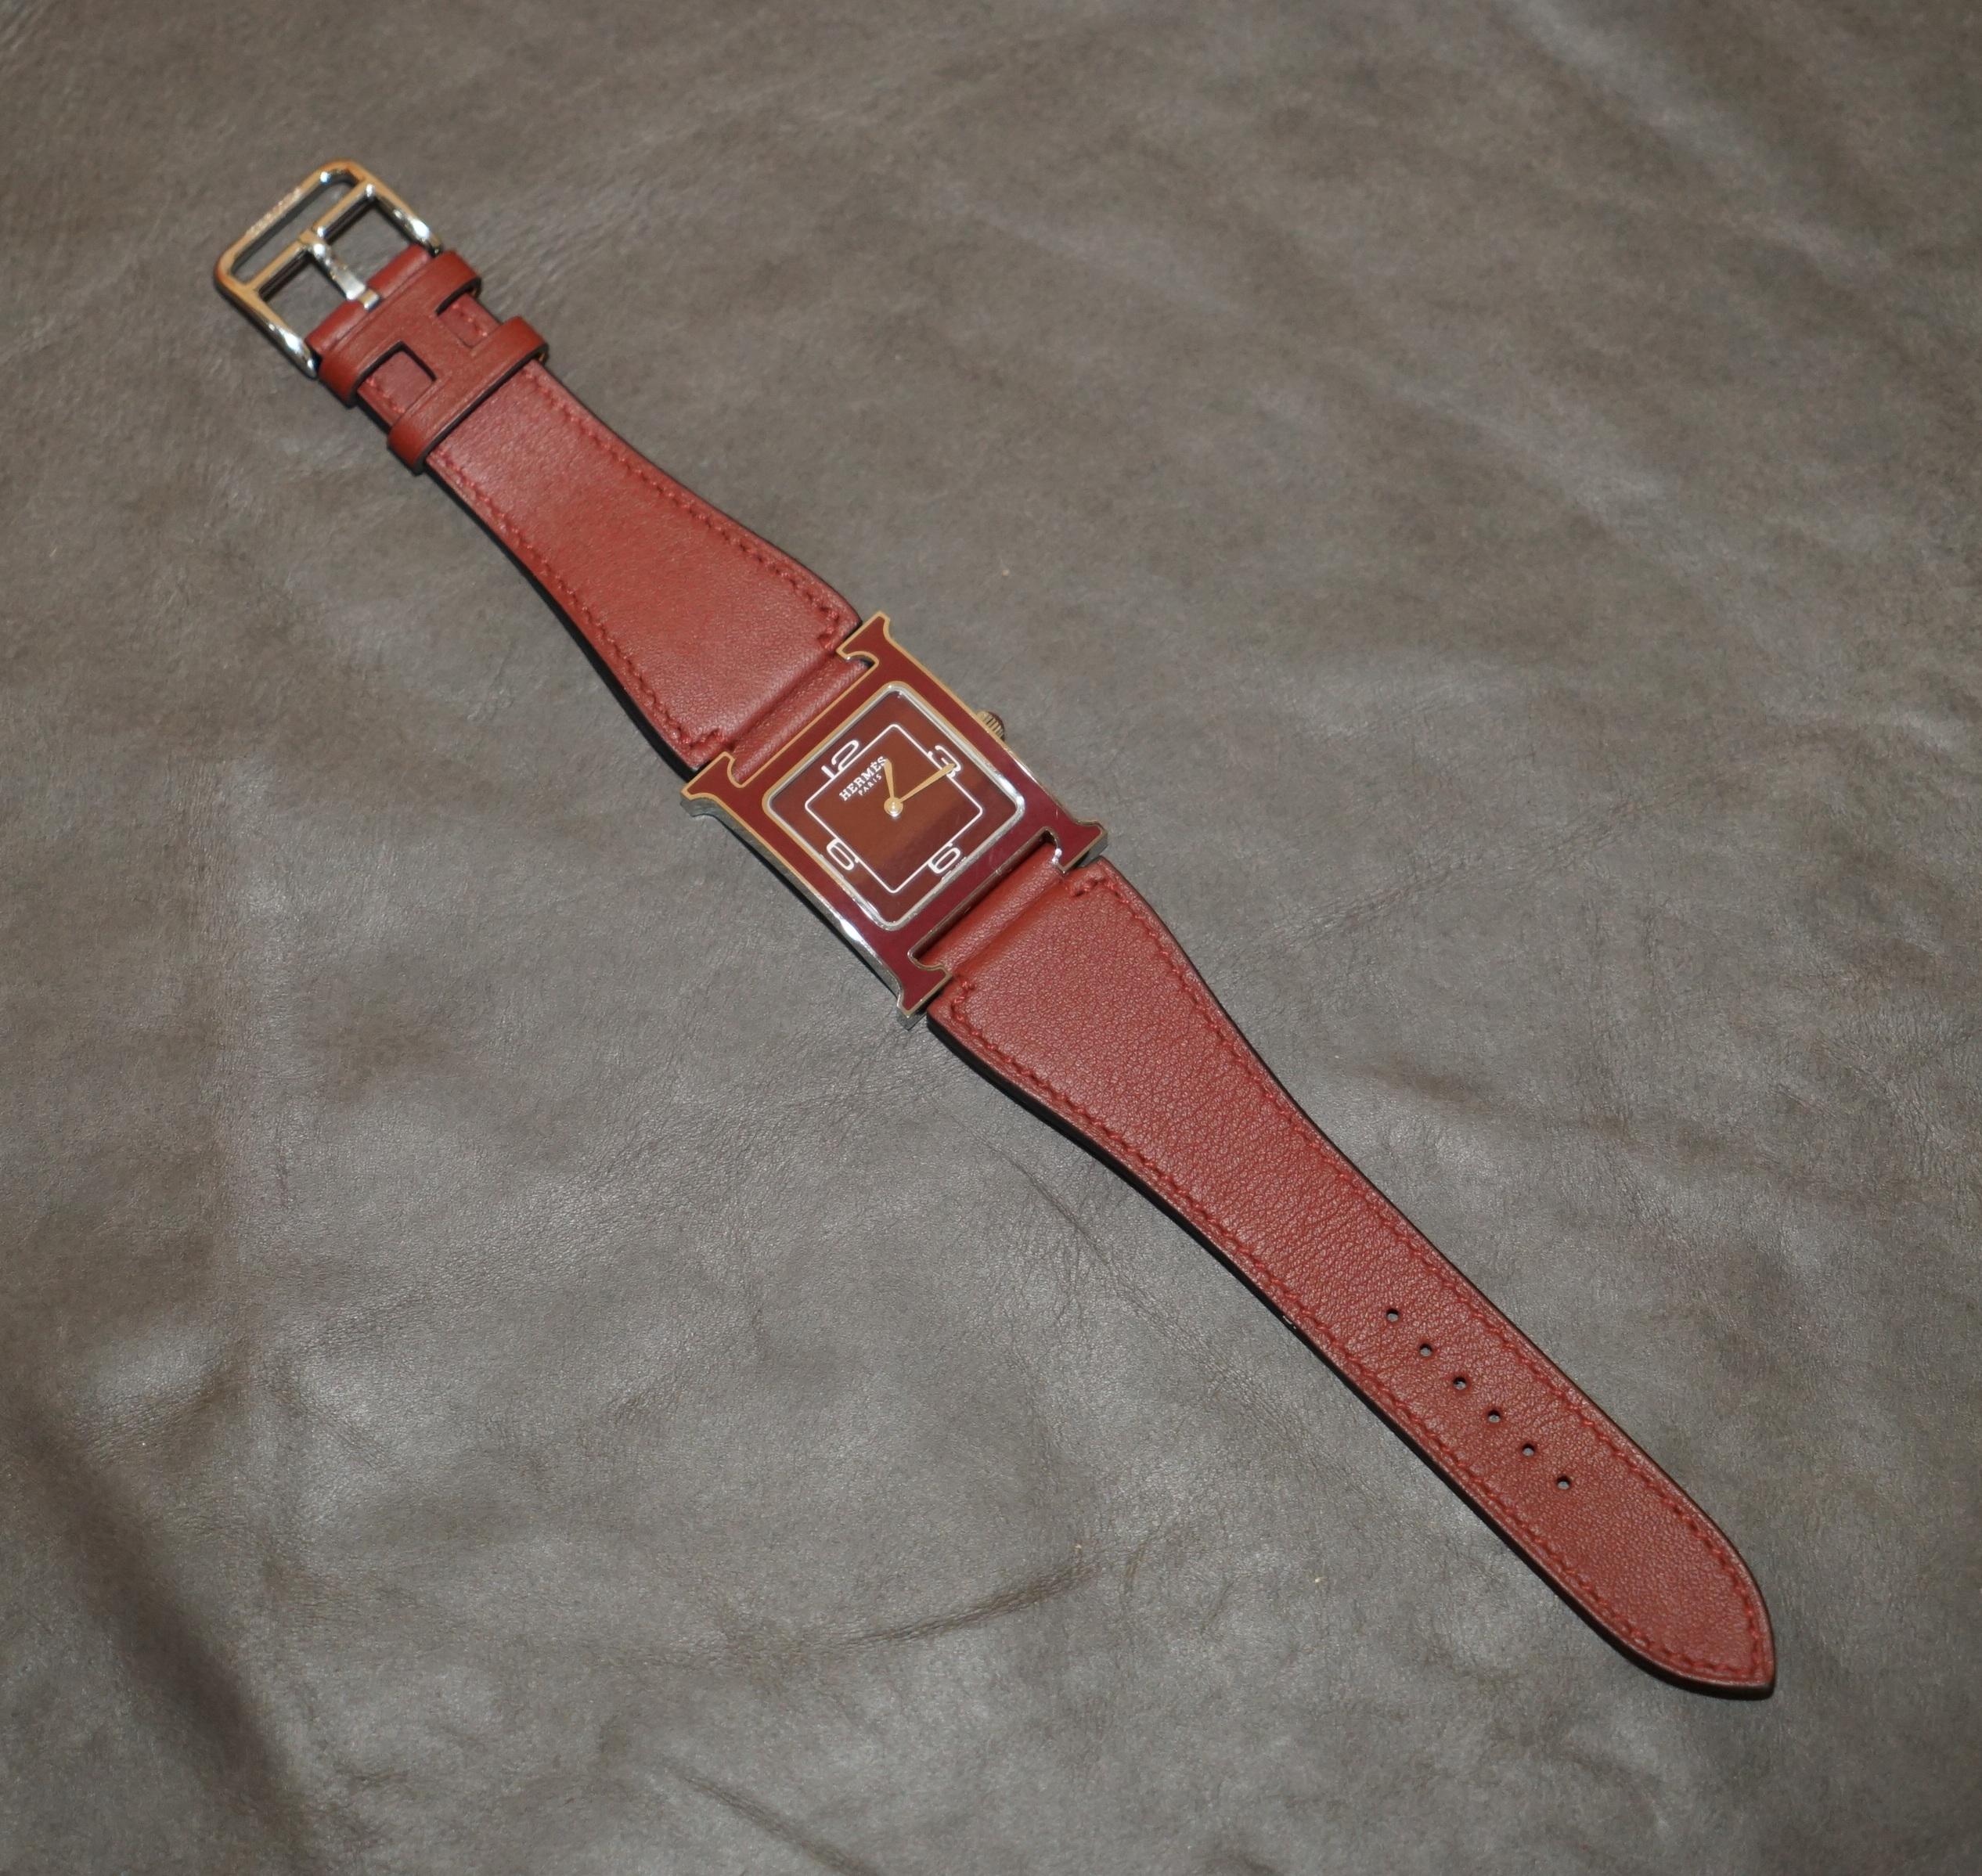 BRAND NEW IN THE ORIGiNAL BOX WITH PAPERWORK HERMES PARIS LTD EDITION H WATCH For Sale 5